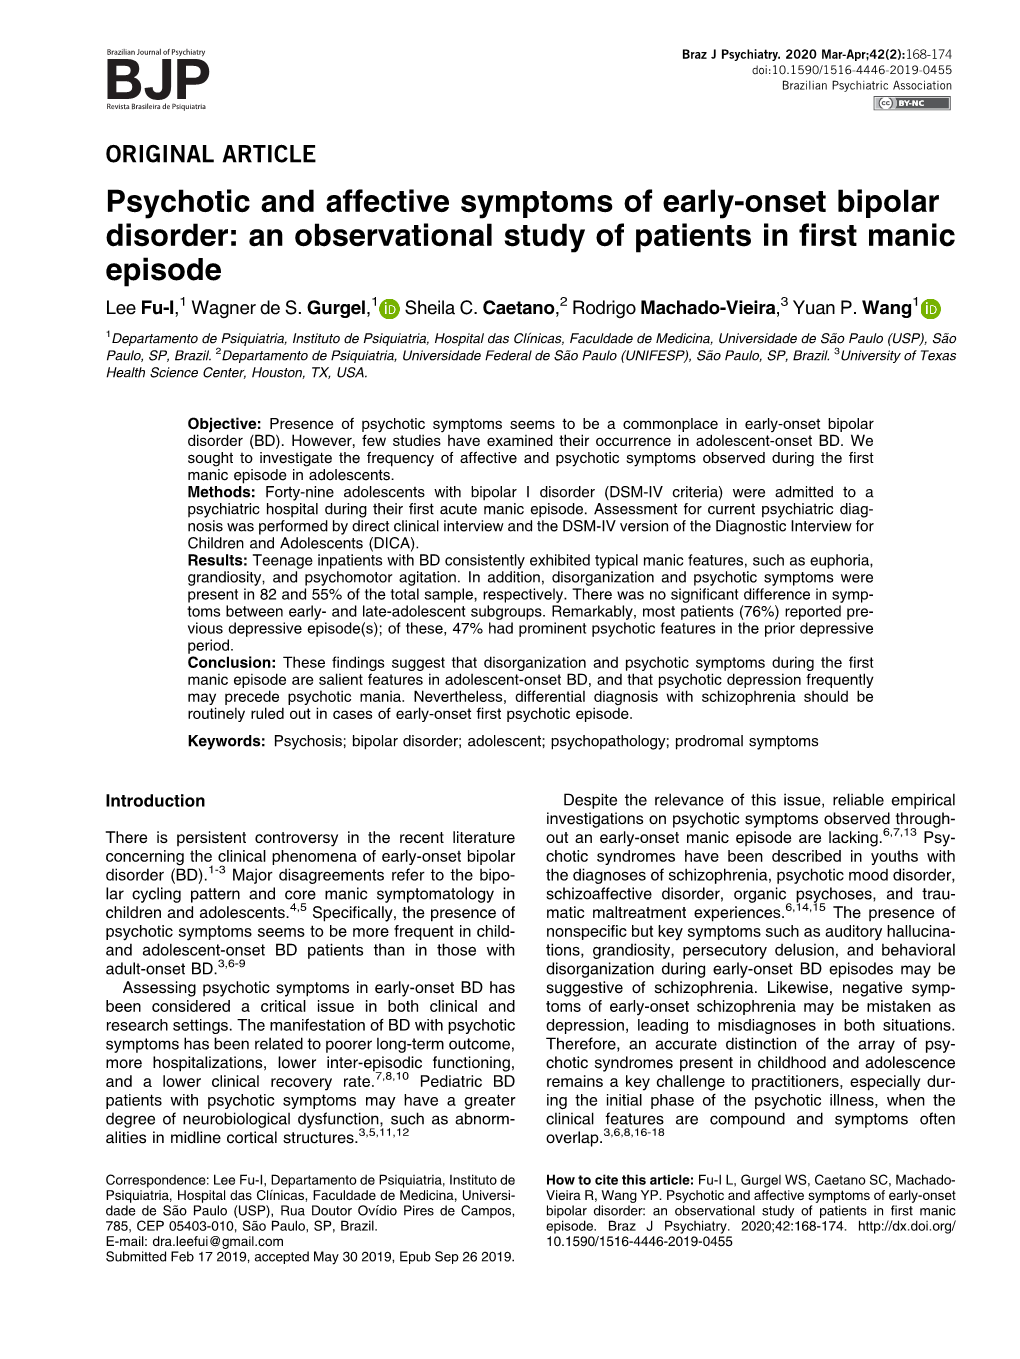 Psychotic and Affective Symptoms of Early-Onset Bipolar Disorder: an Observational Study of Patients in ﬁrst Manic Episode Lee Fu-I,1 Wagner De S